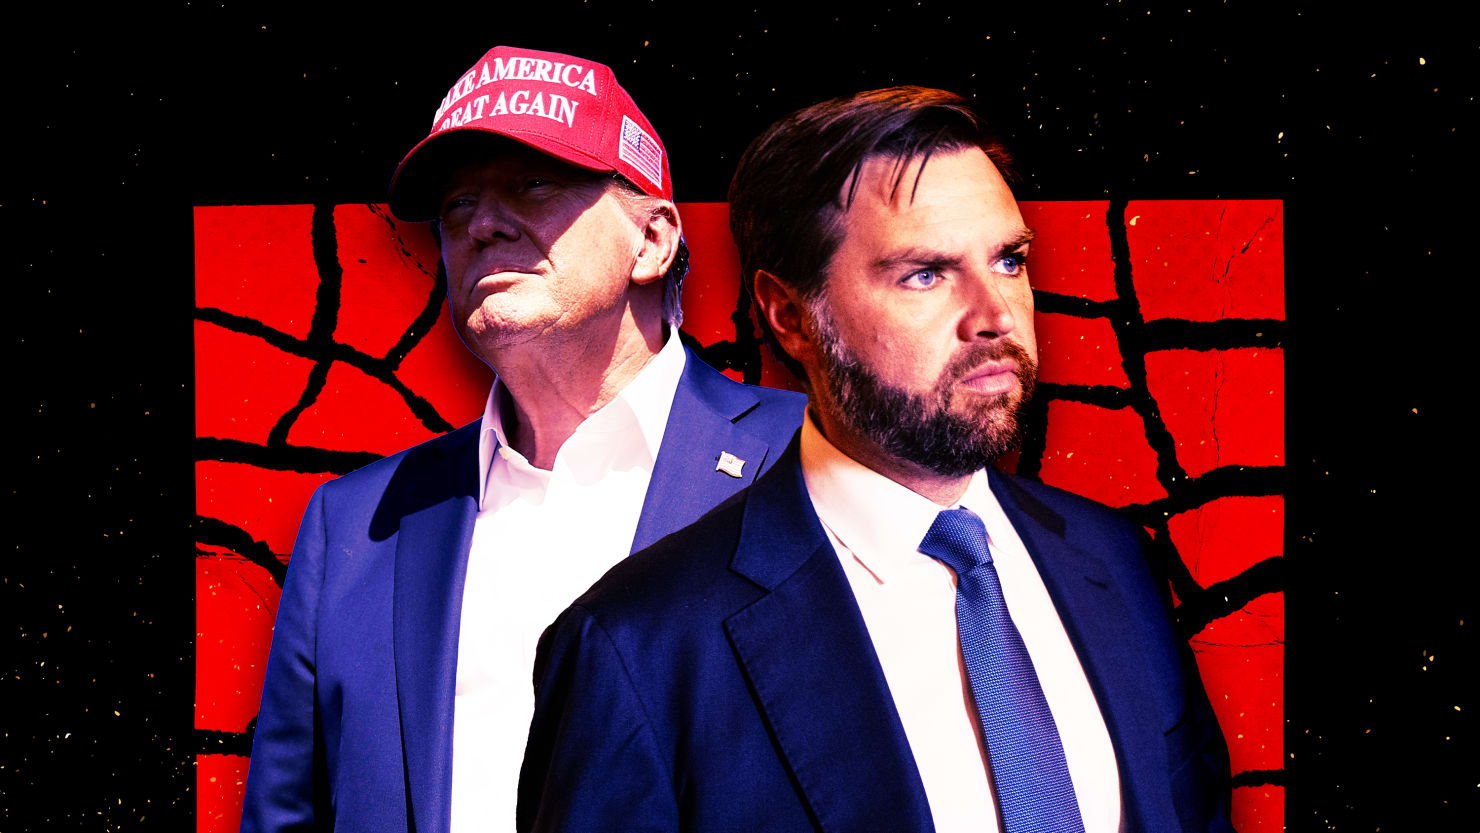 Trump donors on the brink of civil war over JD Vance as vice president